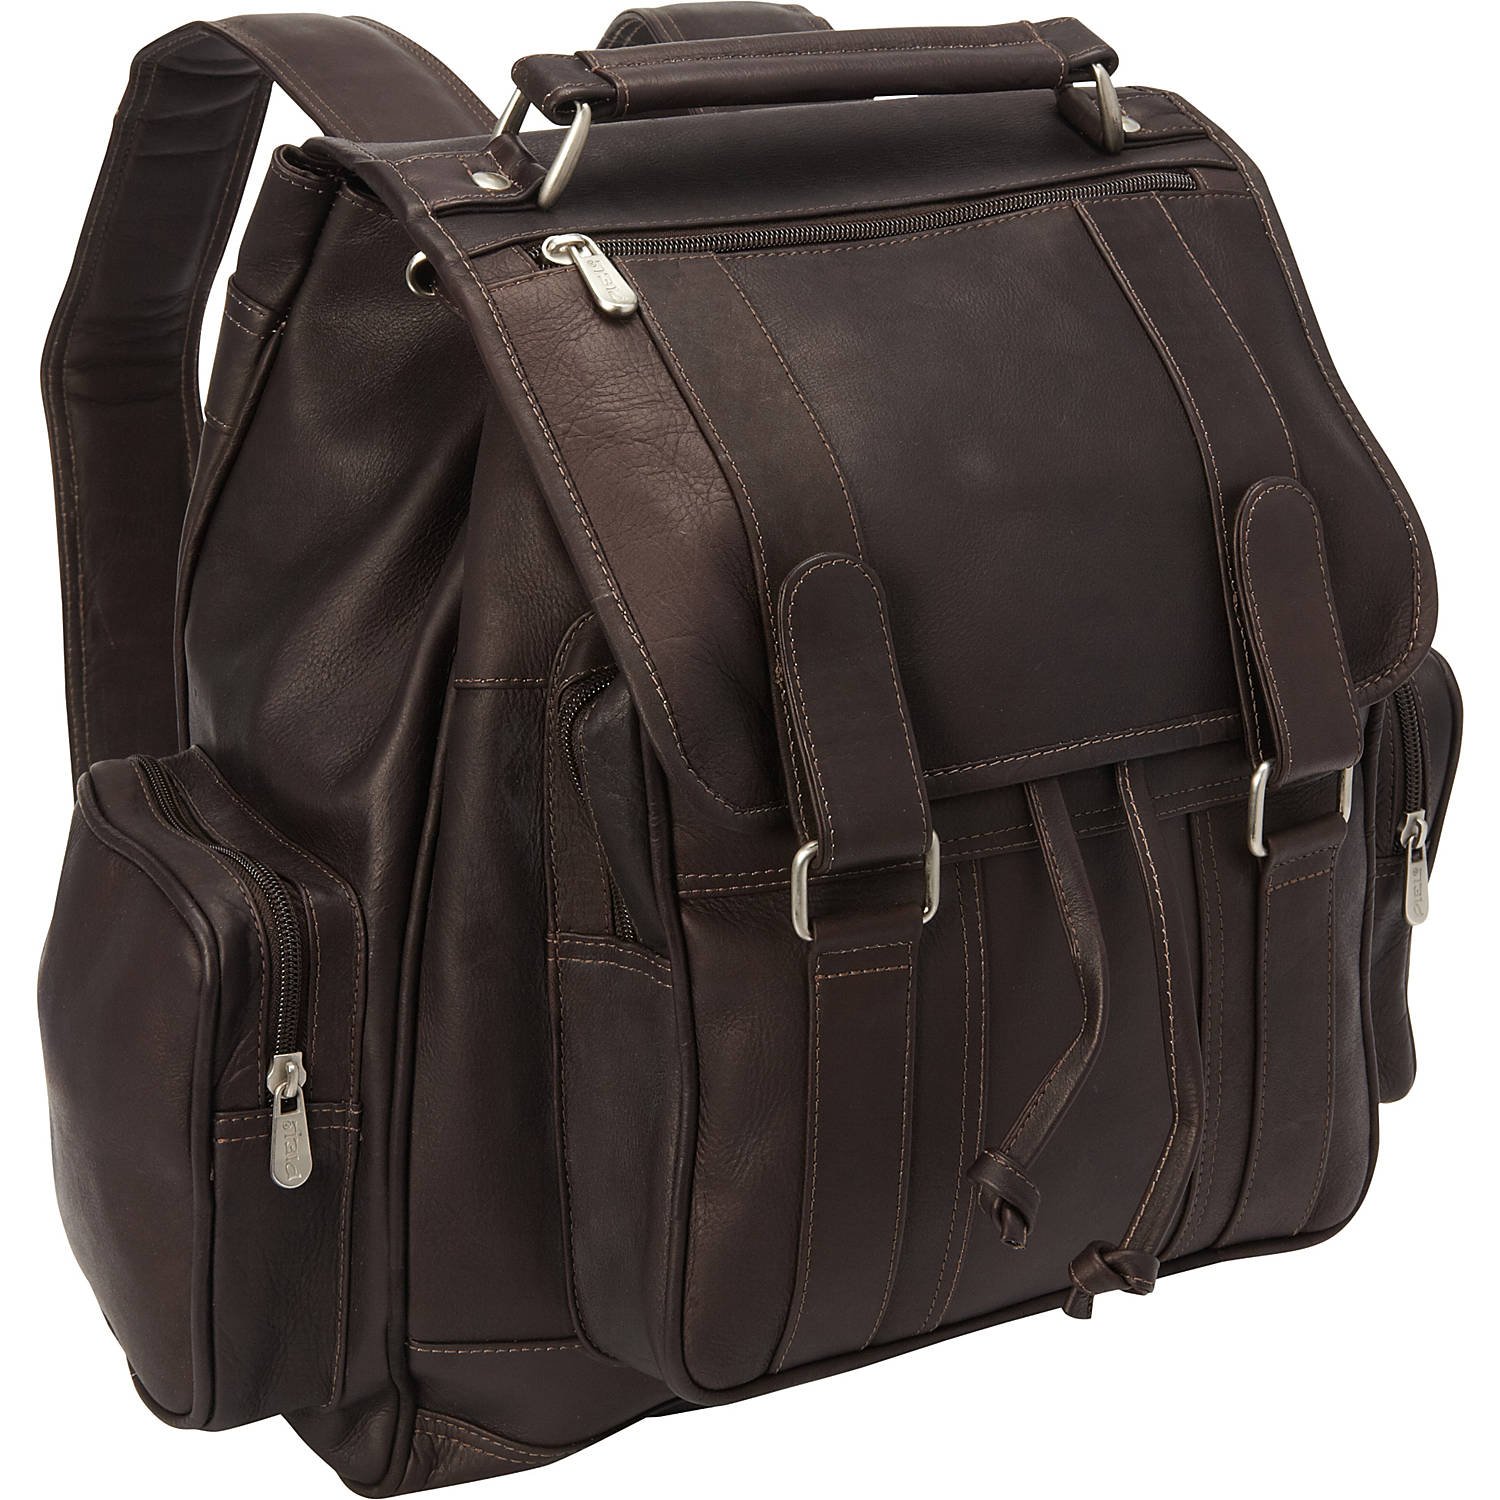 Piel Leather Double Loop Flap-Over Laptop Backpack, Chocolate, One Size